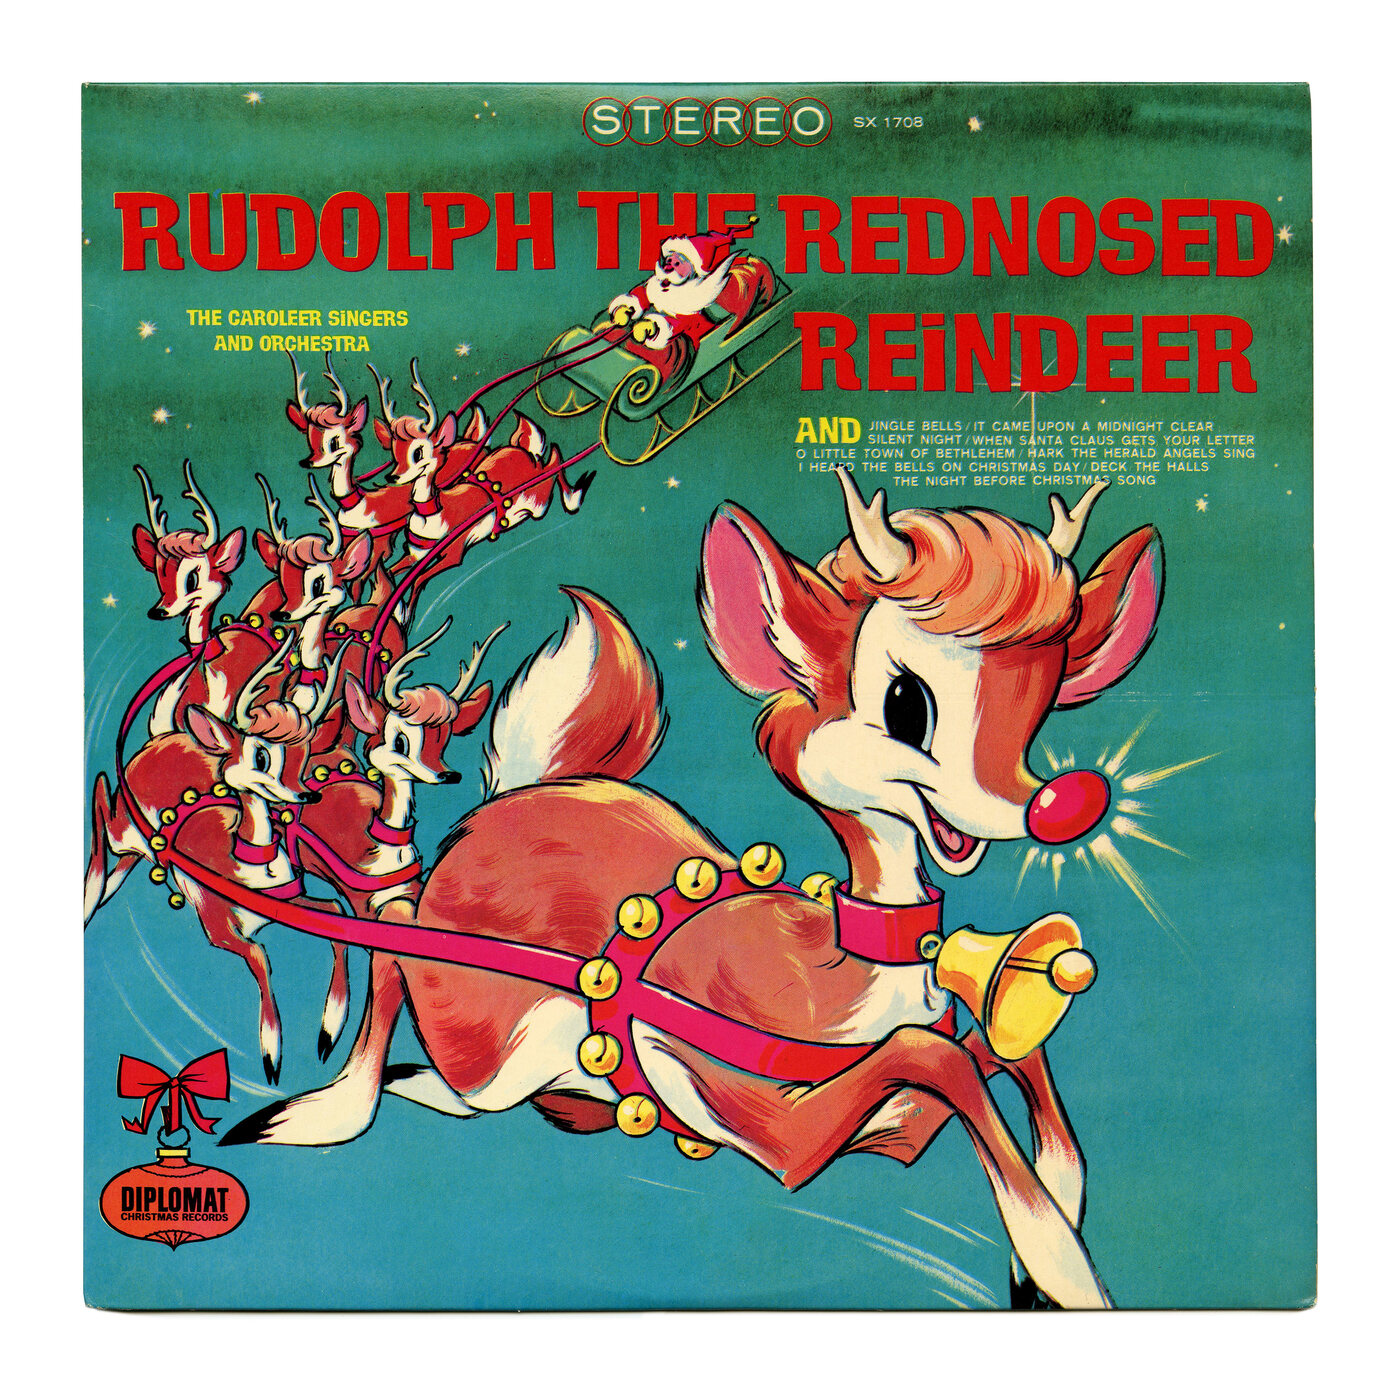 The Caroleers – Rudolph The Red Nosed Reindeer album art - Fonts In Use